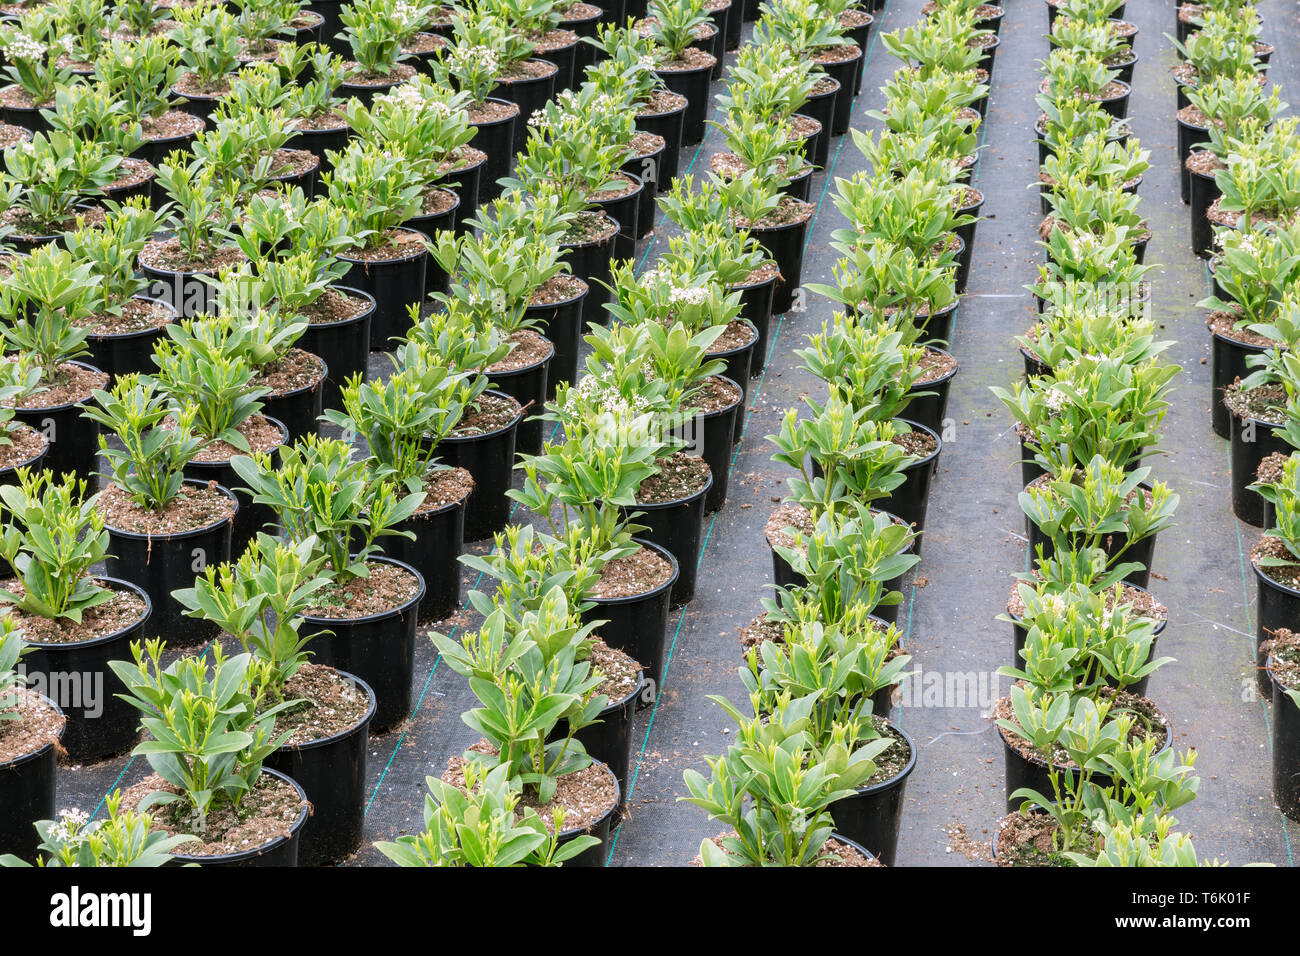 Cultivation of shrub plants (Skimmia) in flowerpots in Dutch greenhouse Stock Photo